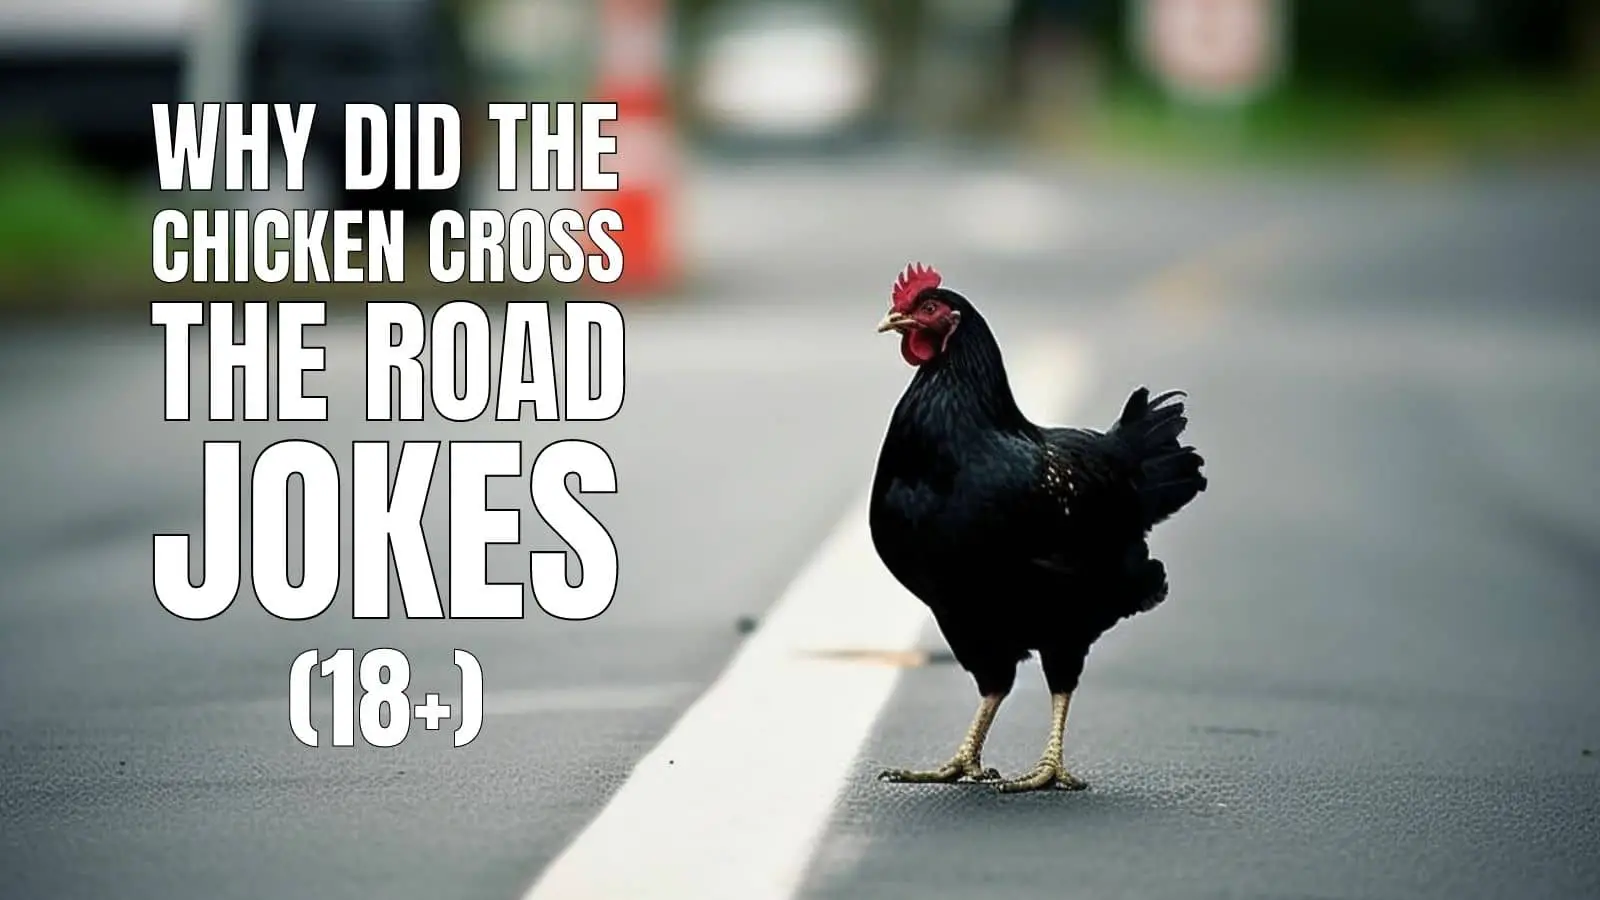 Dark Why Did the Chicken Cross the Road Jokes